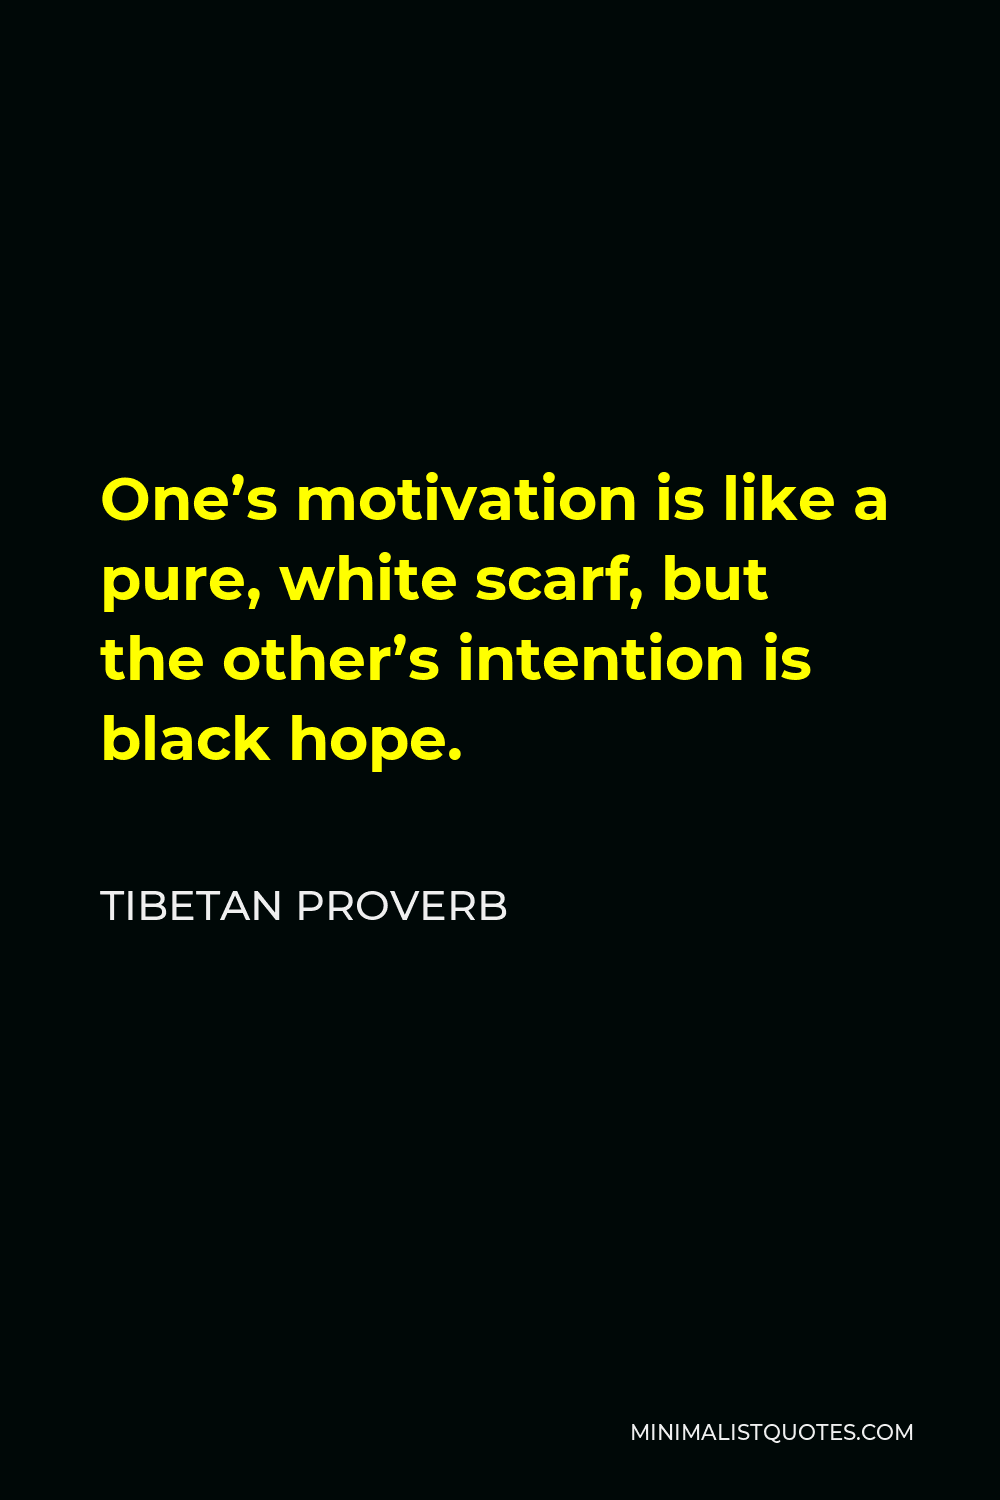 Tibetan Proverb Quote - One’s motivation is like a pure, white scarf, but the other’s intention is black hope.